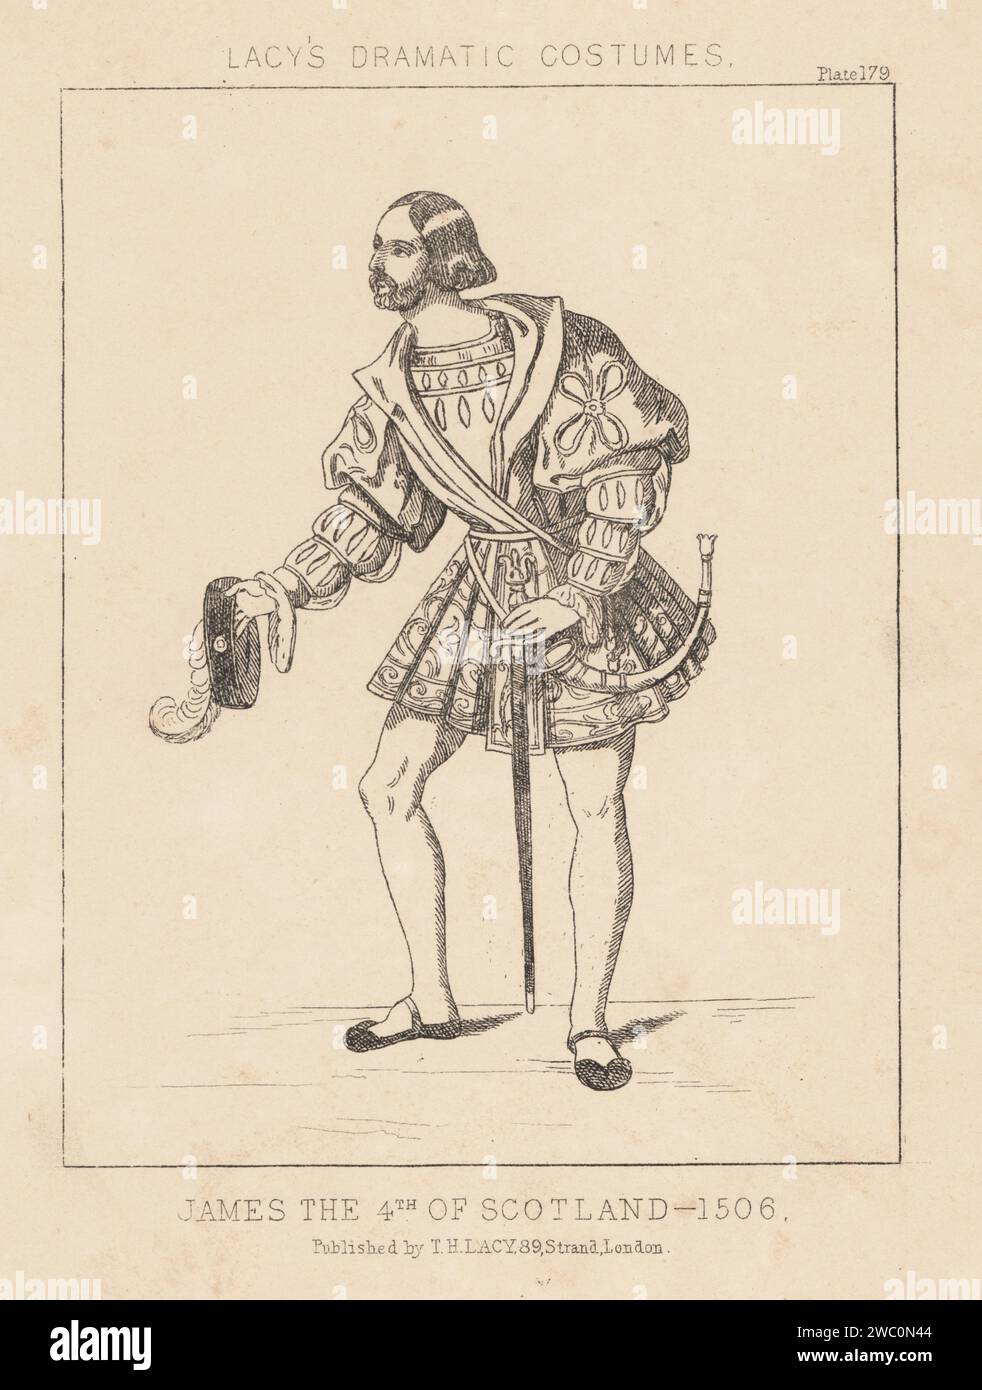 Costume of King James IV of Scotland 1506. In quilted doublet and hose, court sword and hunting horn hanging from his belt, holding a plumed cap. Lithograph from Thomas Hailes Lacy's Male Costumes, Historical, National and Dramatic in 200 Plates, London, 1865. Lacy (1809-1873) was a British actor, playwright, theatrical manager and publisher. Stock Photo